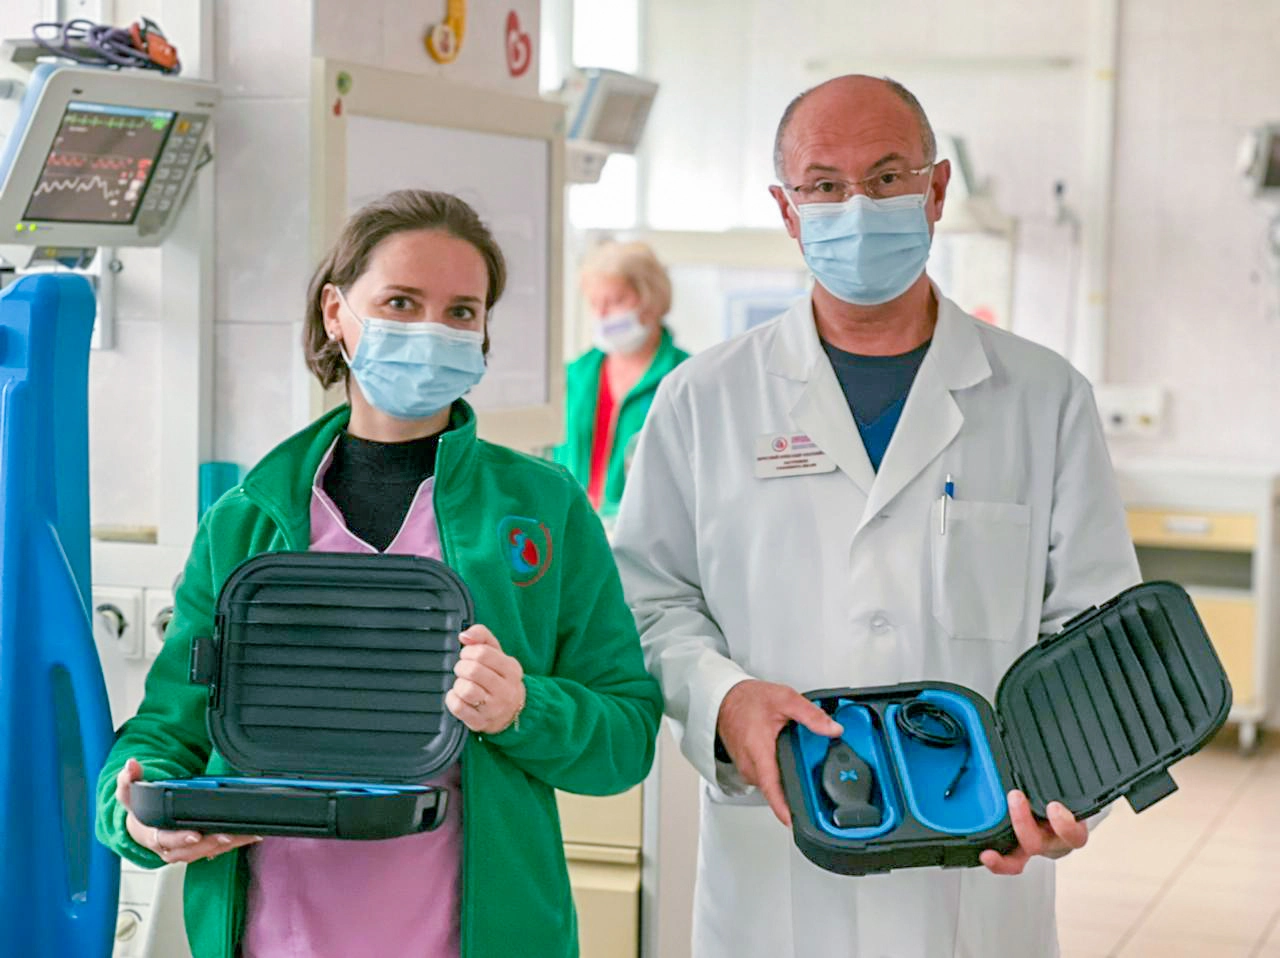 Two doctors, one in green jacket over pink scrubs and one in white lab coat, both masked holding iQ probes in their cases.